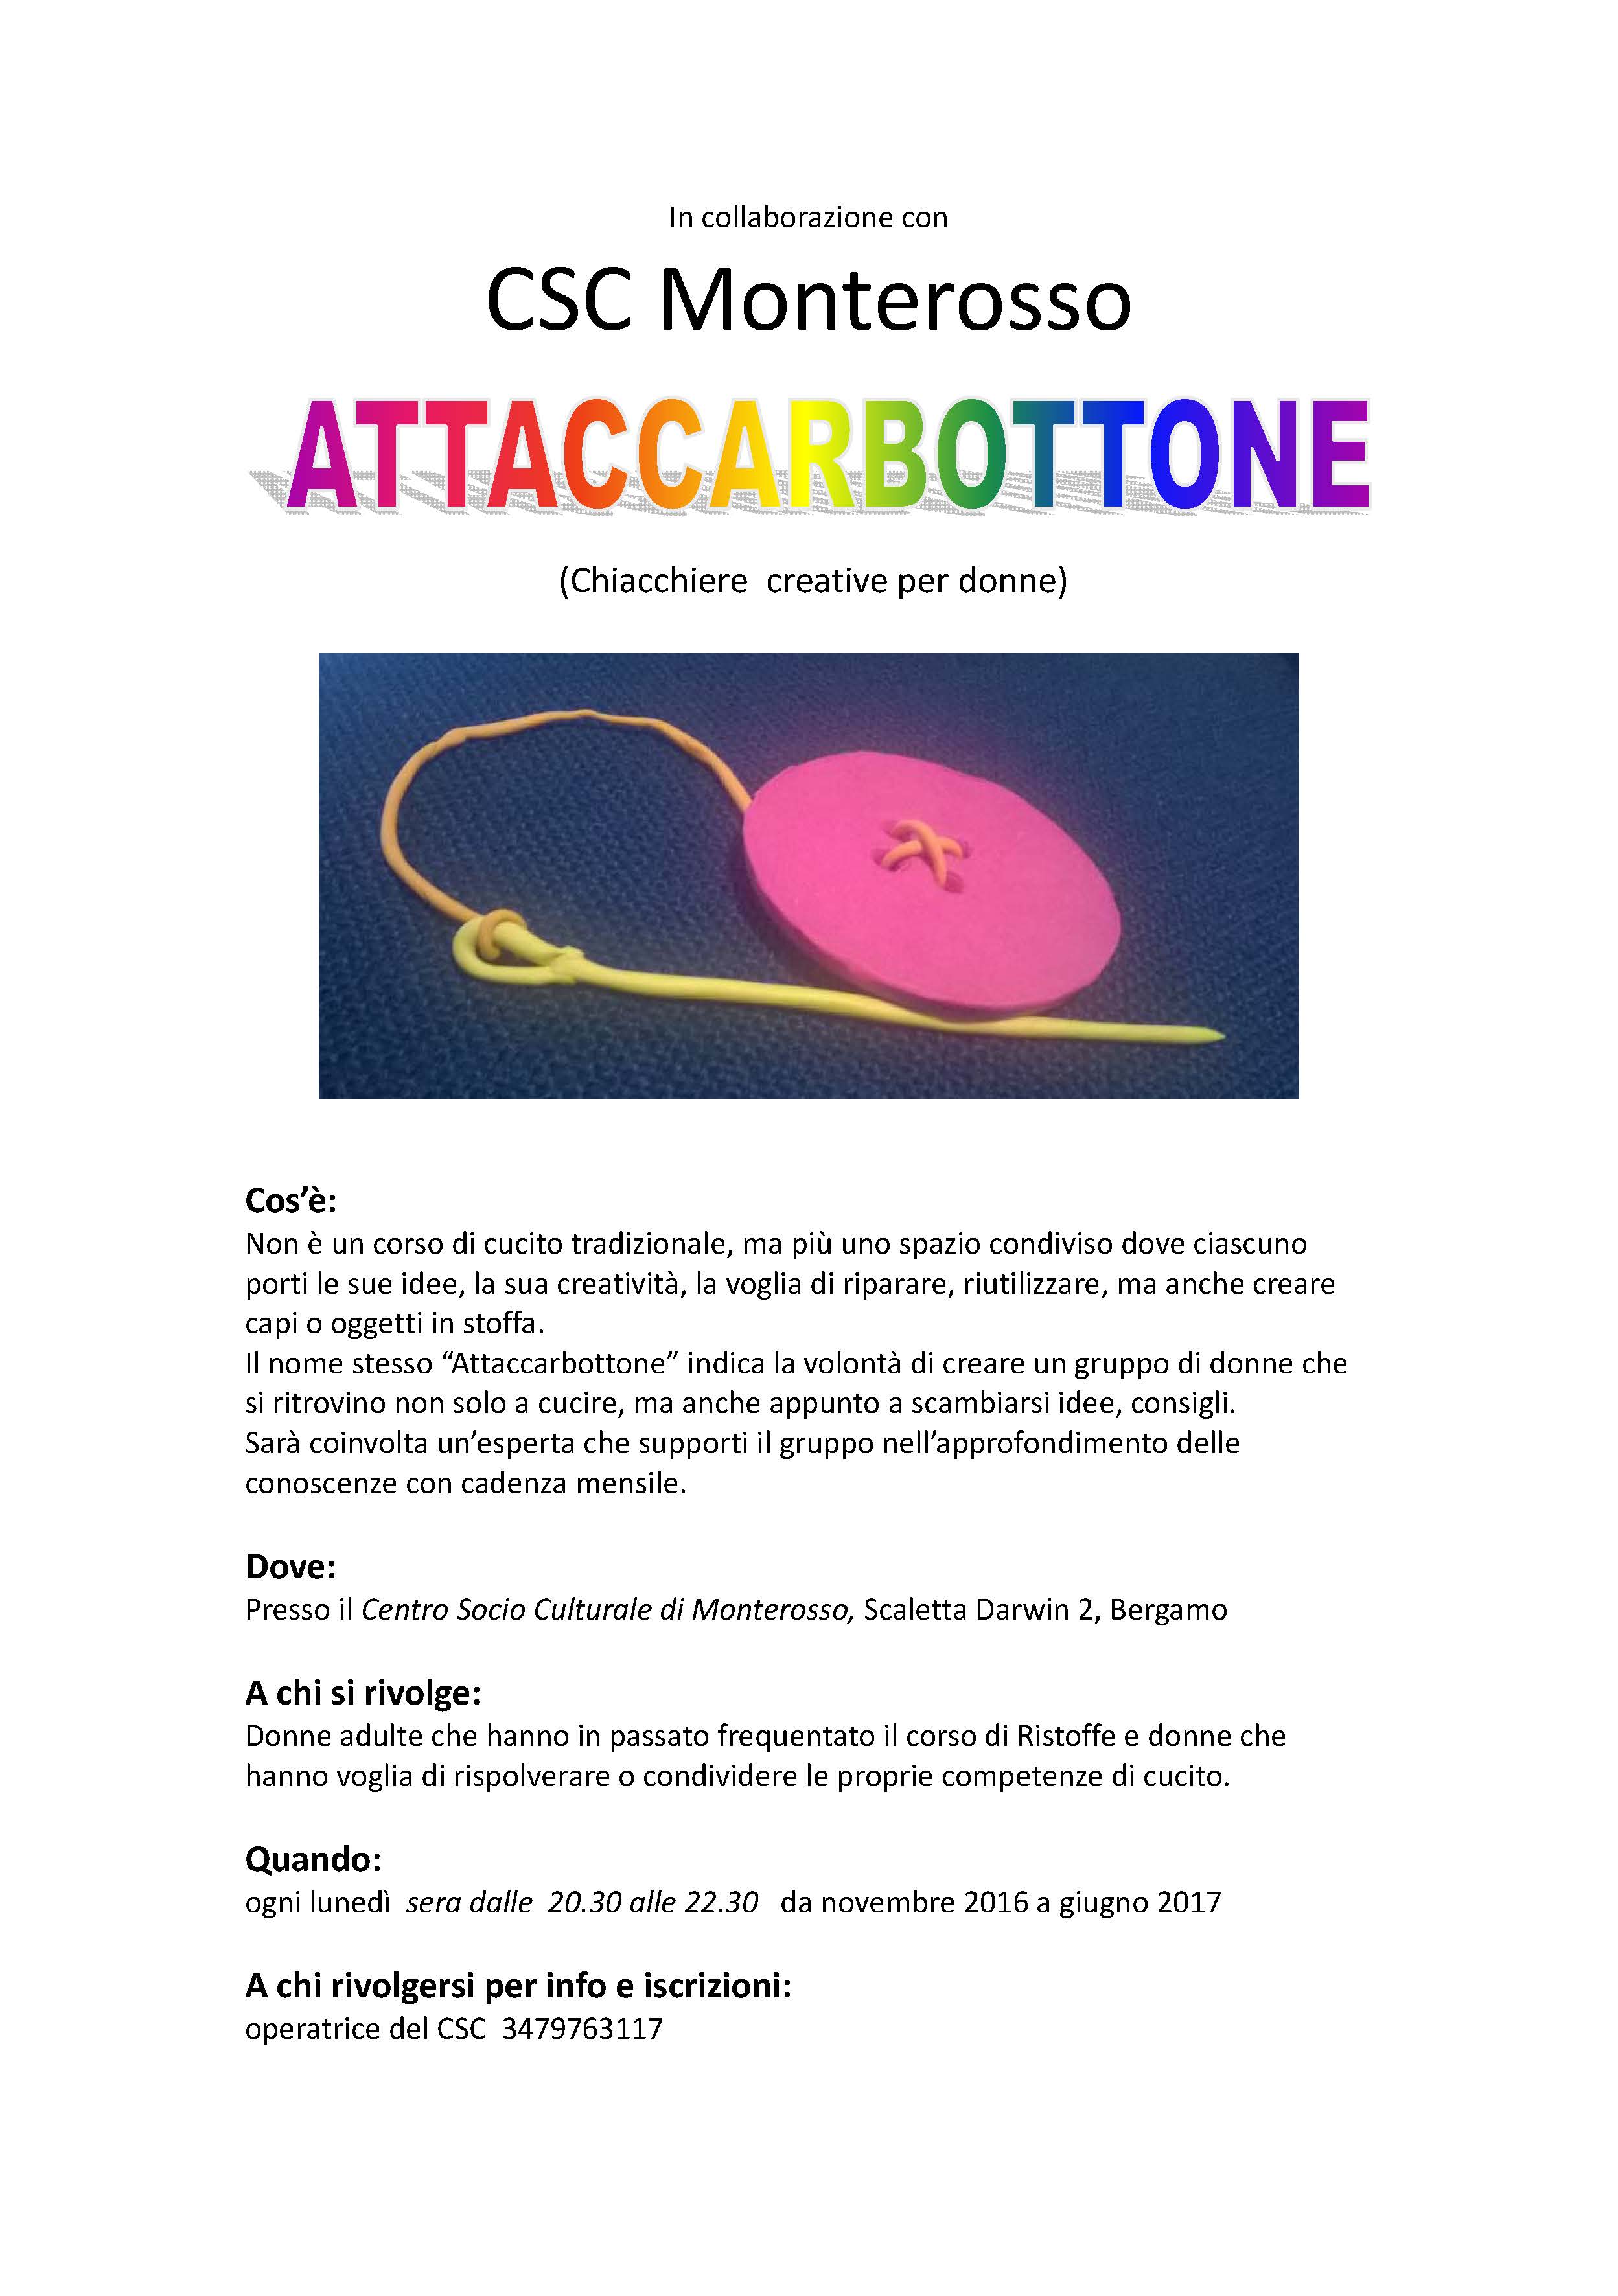 attaccarbottone_vol